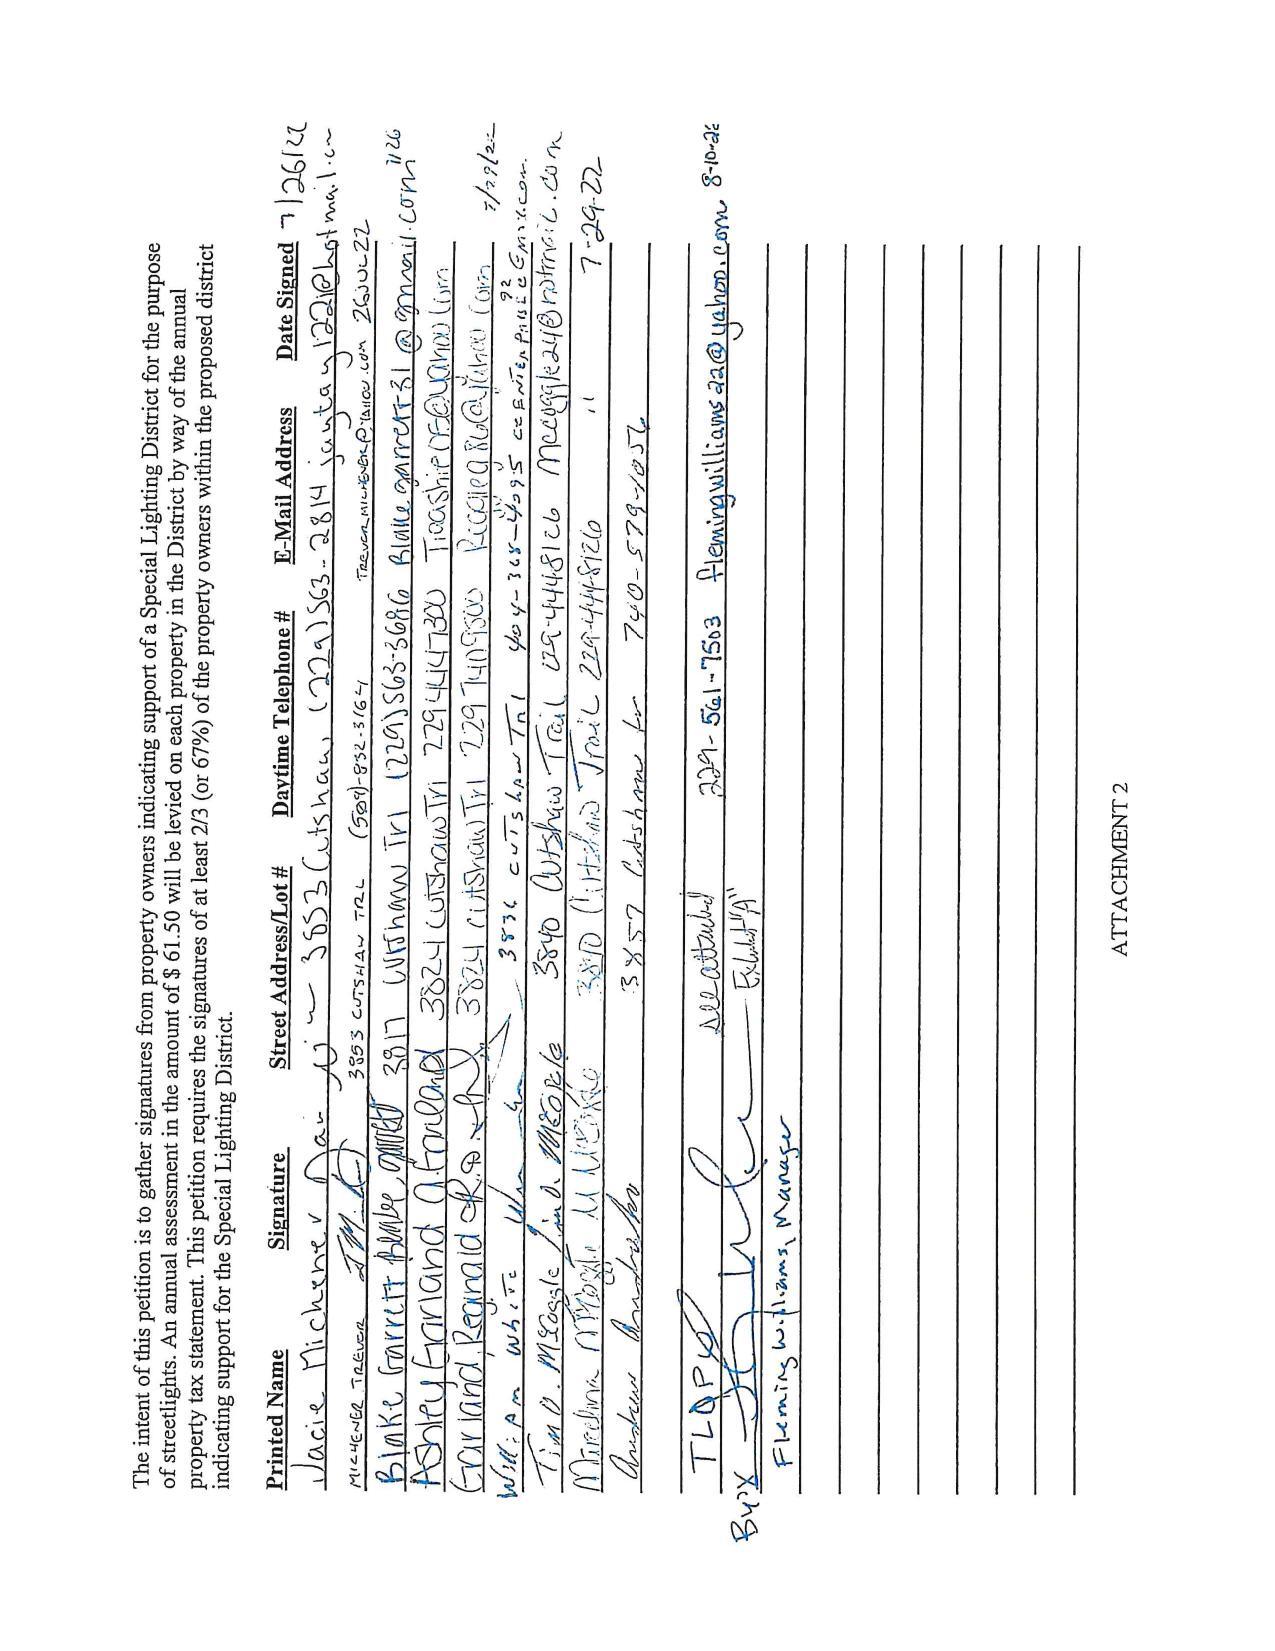 The Landings petition signatures